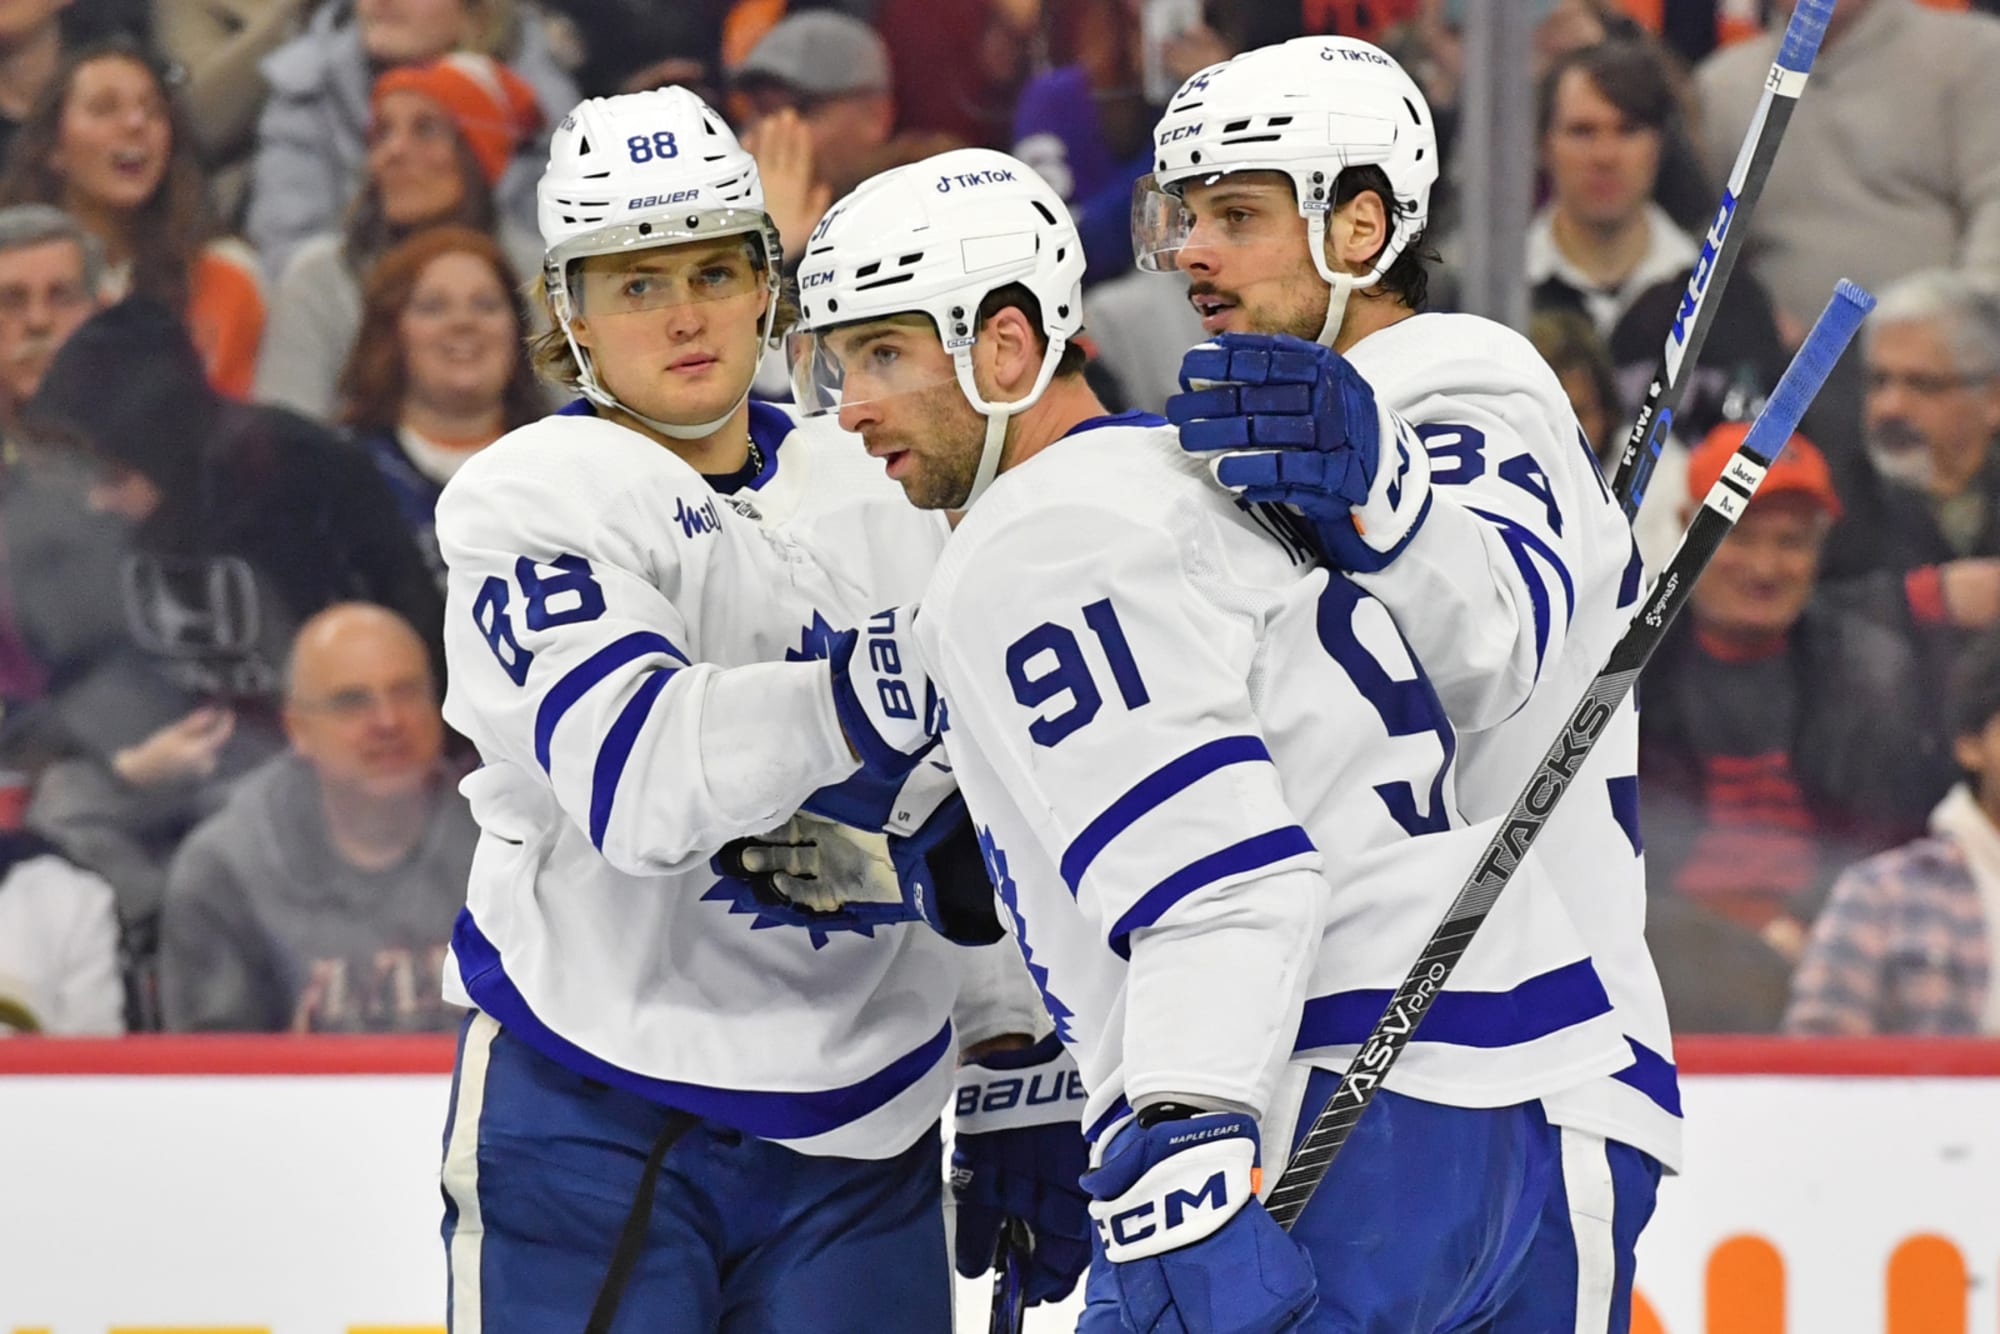 Nylander scores career-high 32nd goal of season to propel Maple Leafs past  Flyers